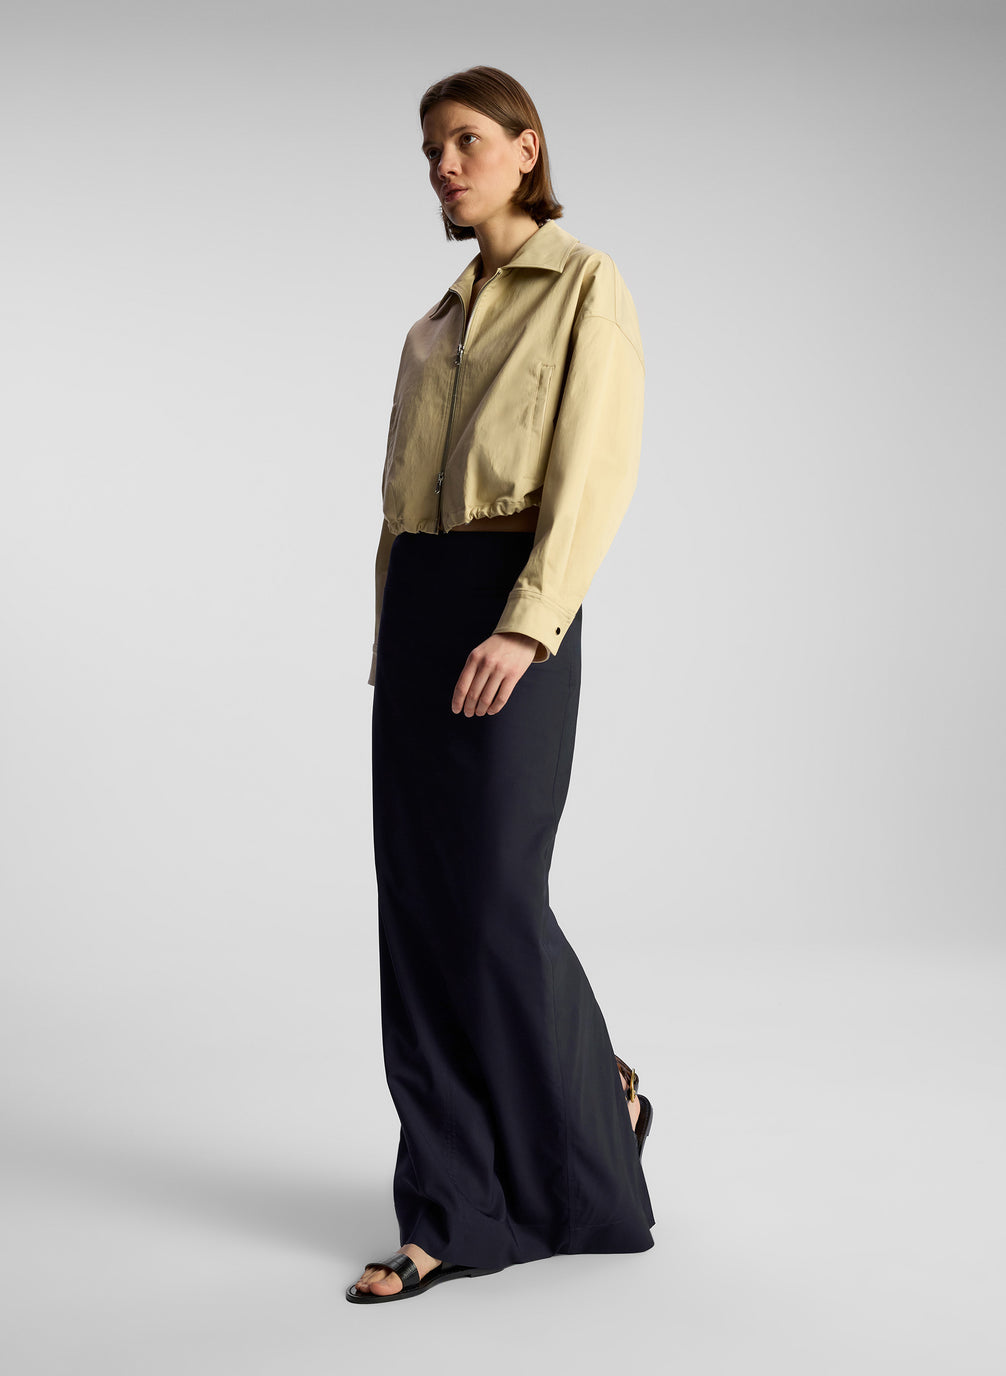 side view of woman wearing tan jacket and navy blue maxi skirt